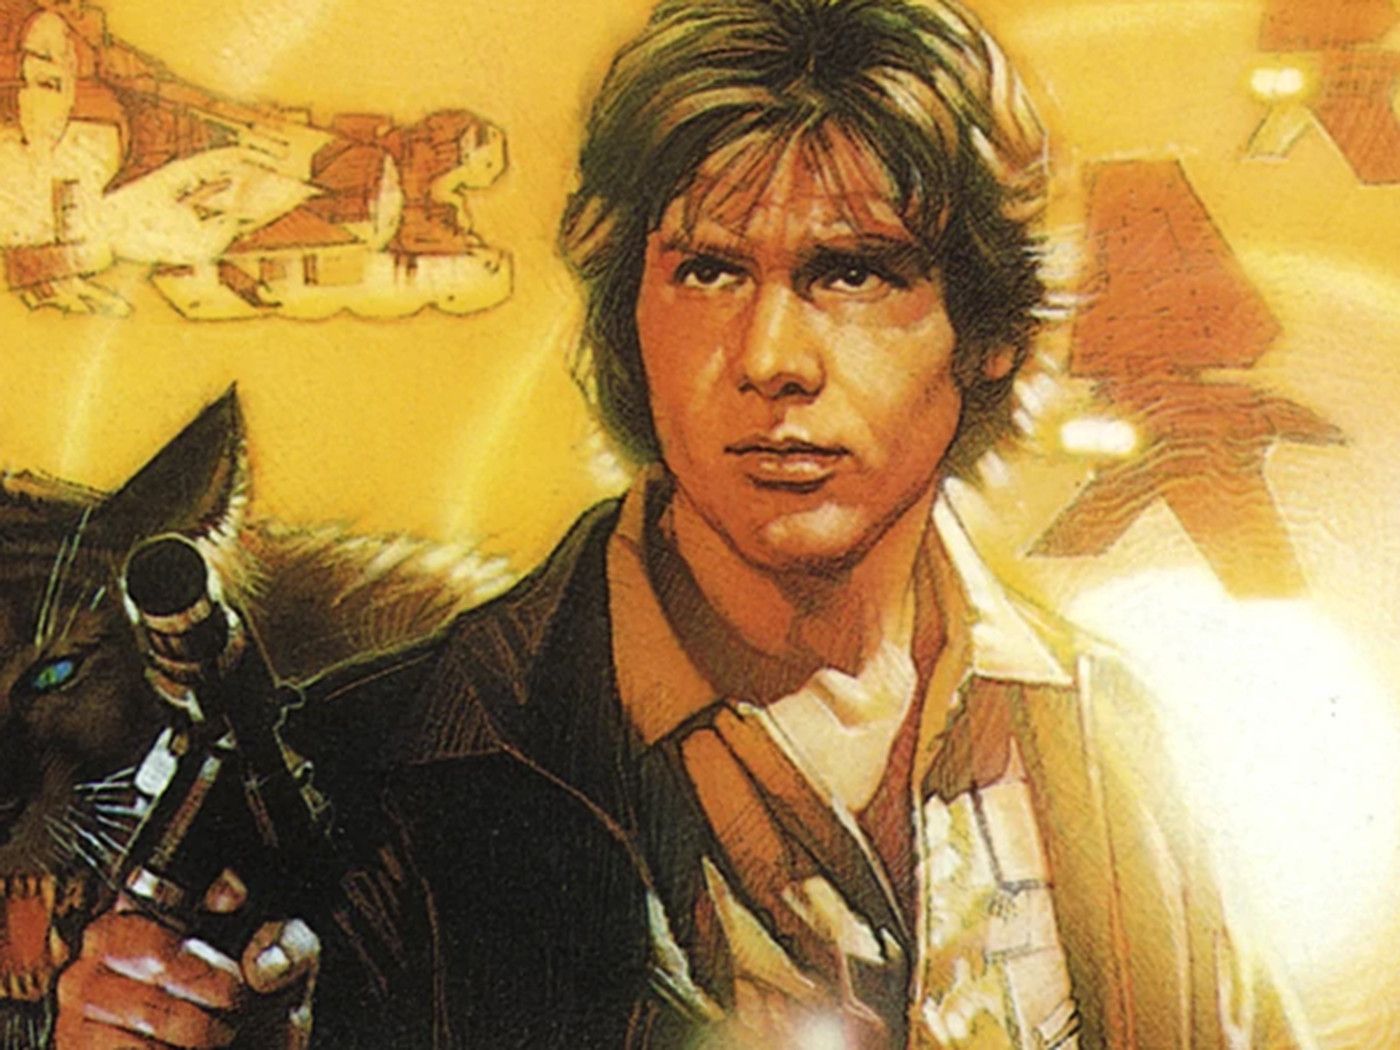 Solo demonstrates that the Star Wars expanded universe hasn't been